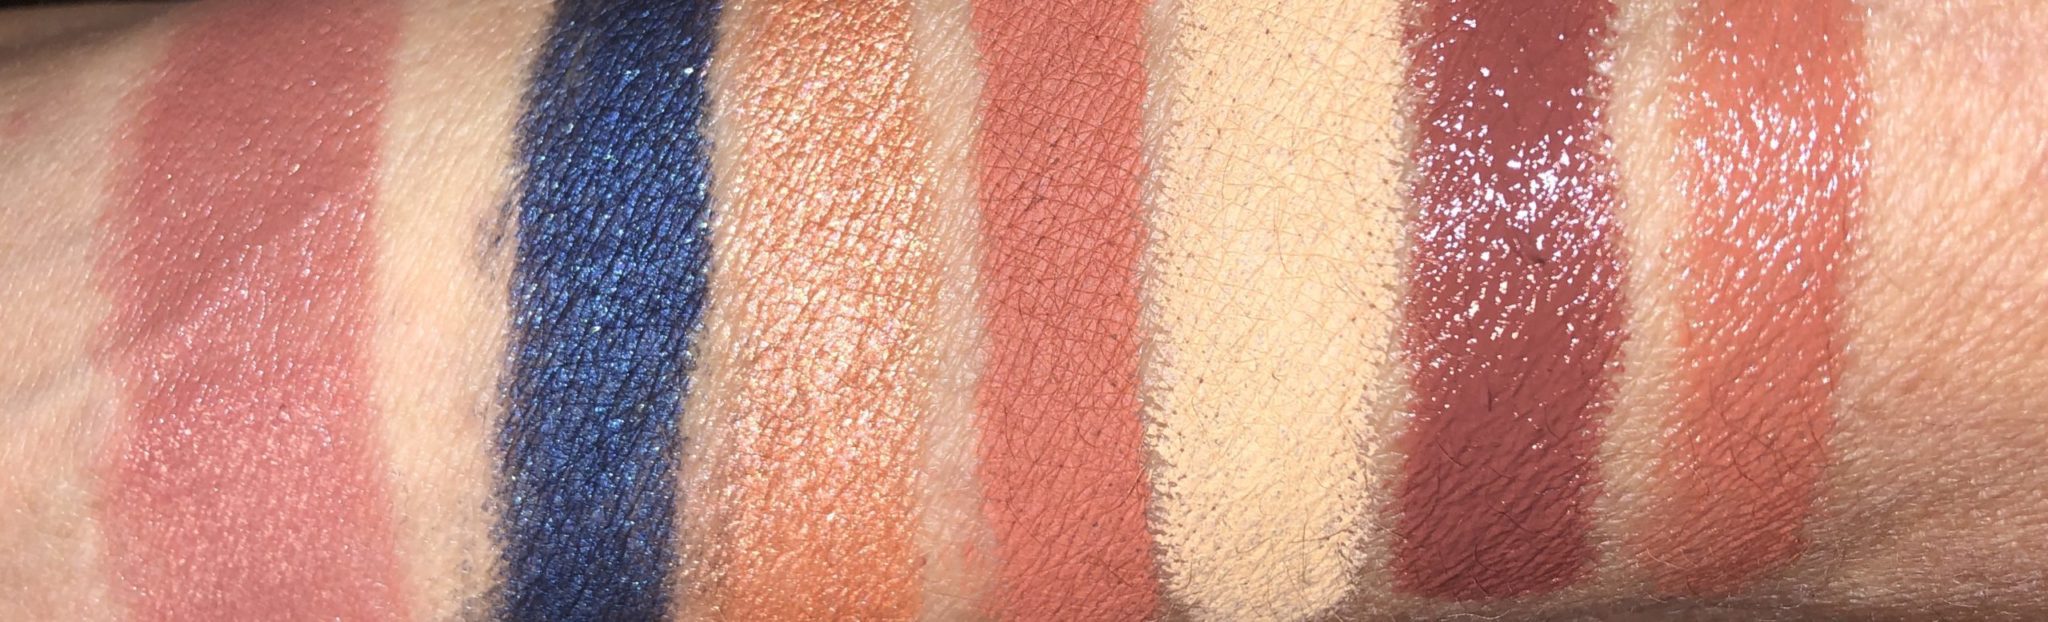 NUDE BEACH KIT SWATCHES